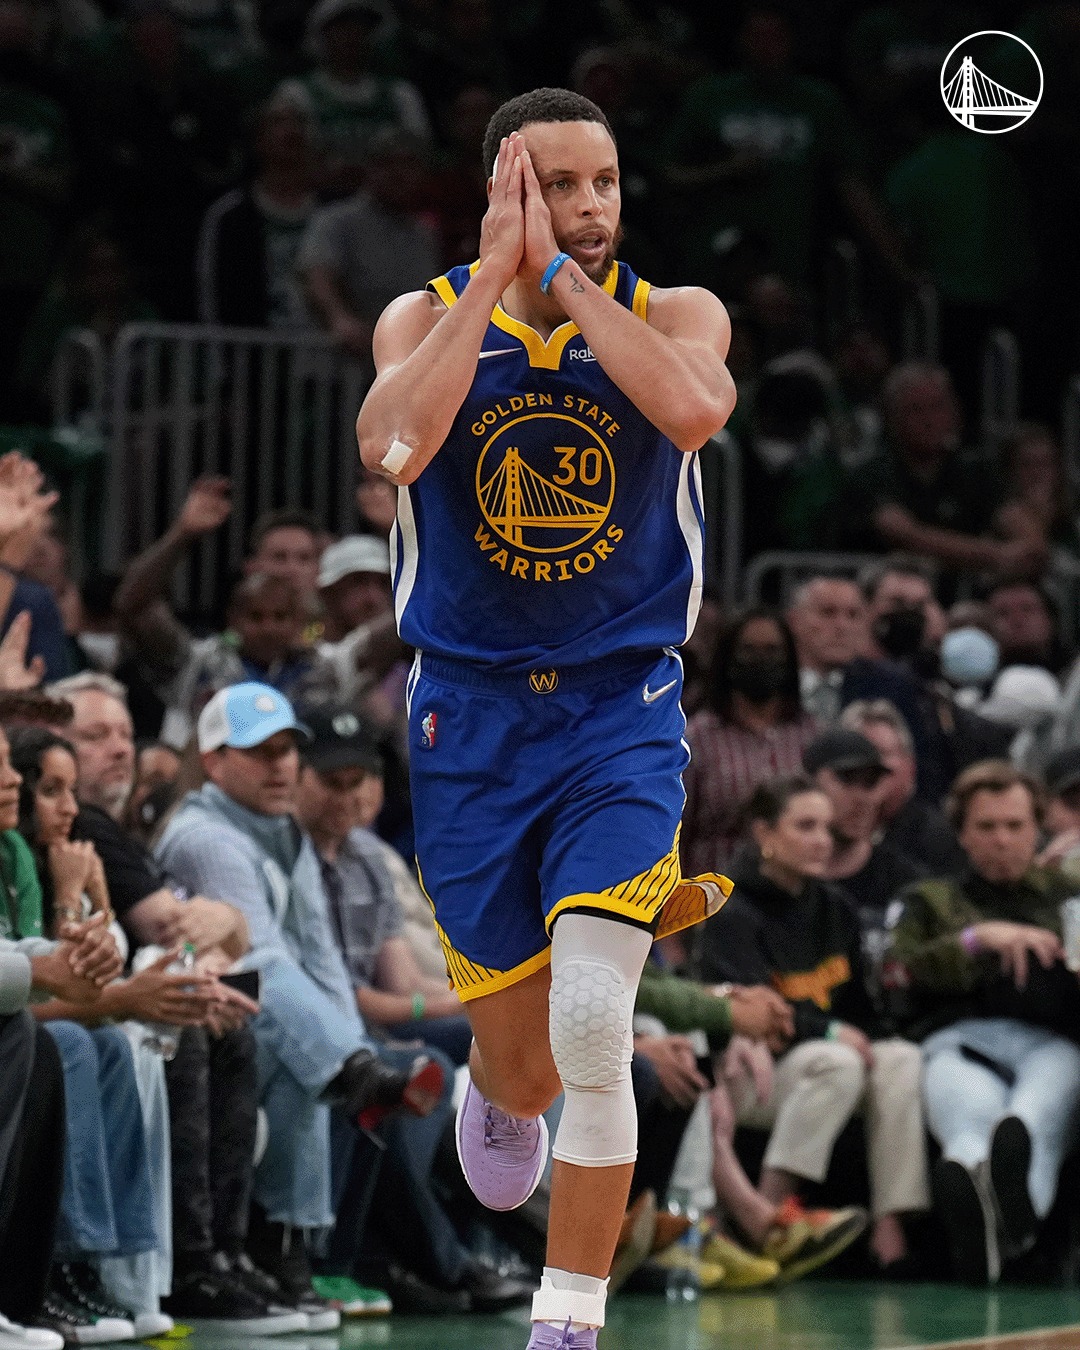 Stephen Curry for the Golden State Warriors